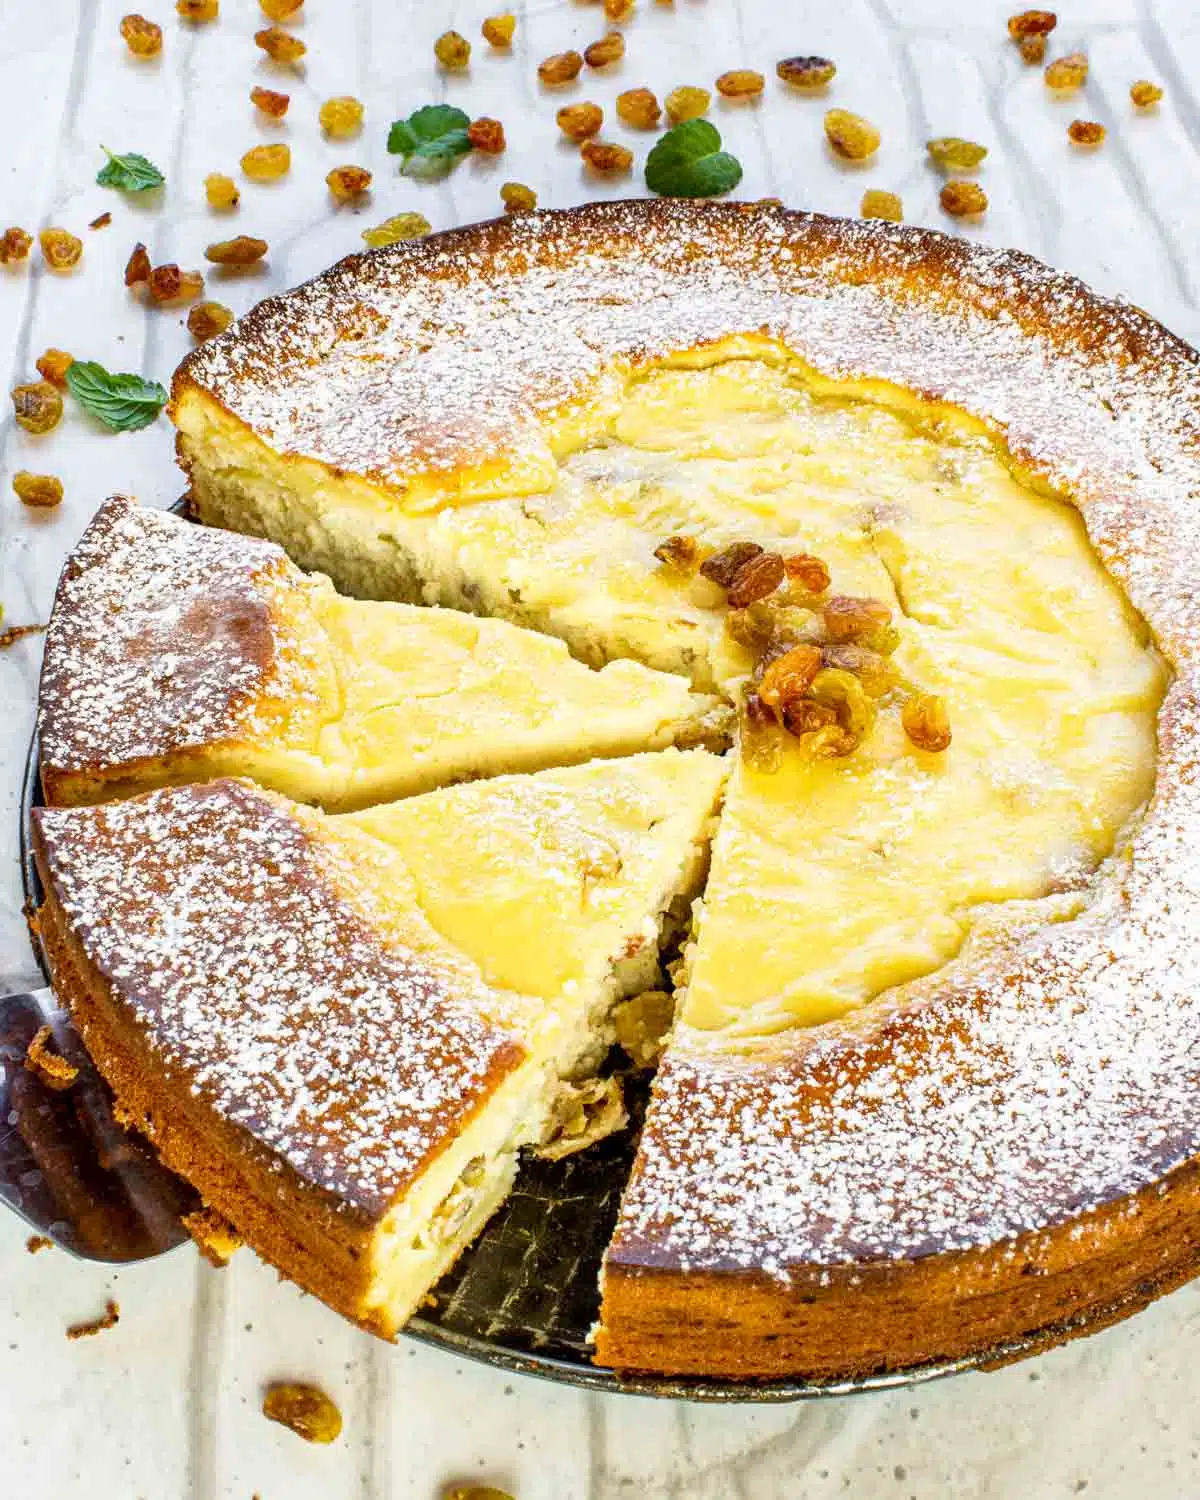 freshly baked ricotta cheesecake with 2 slices cut out.